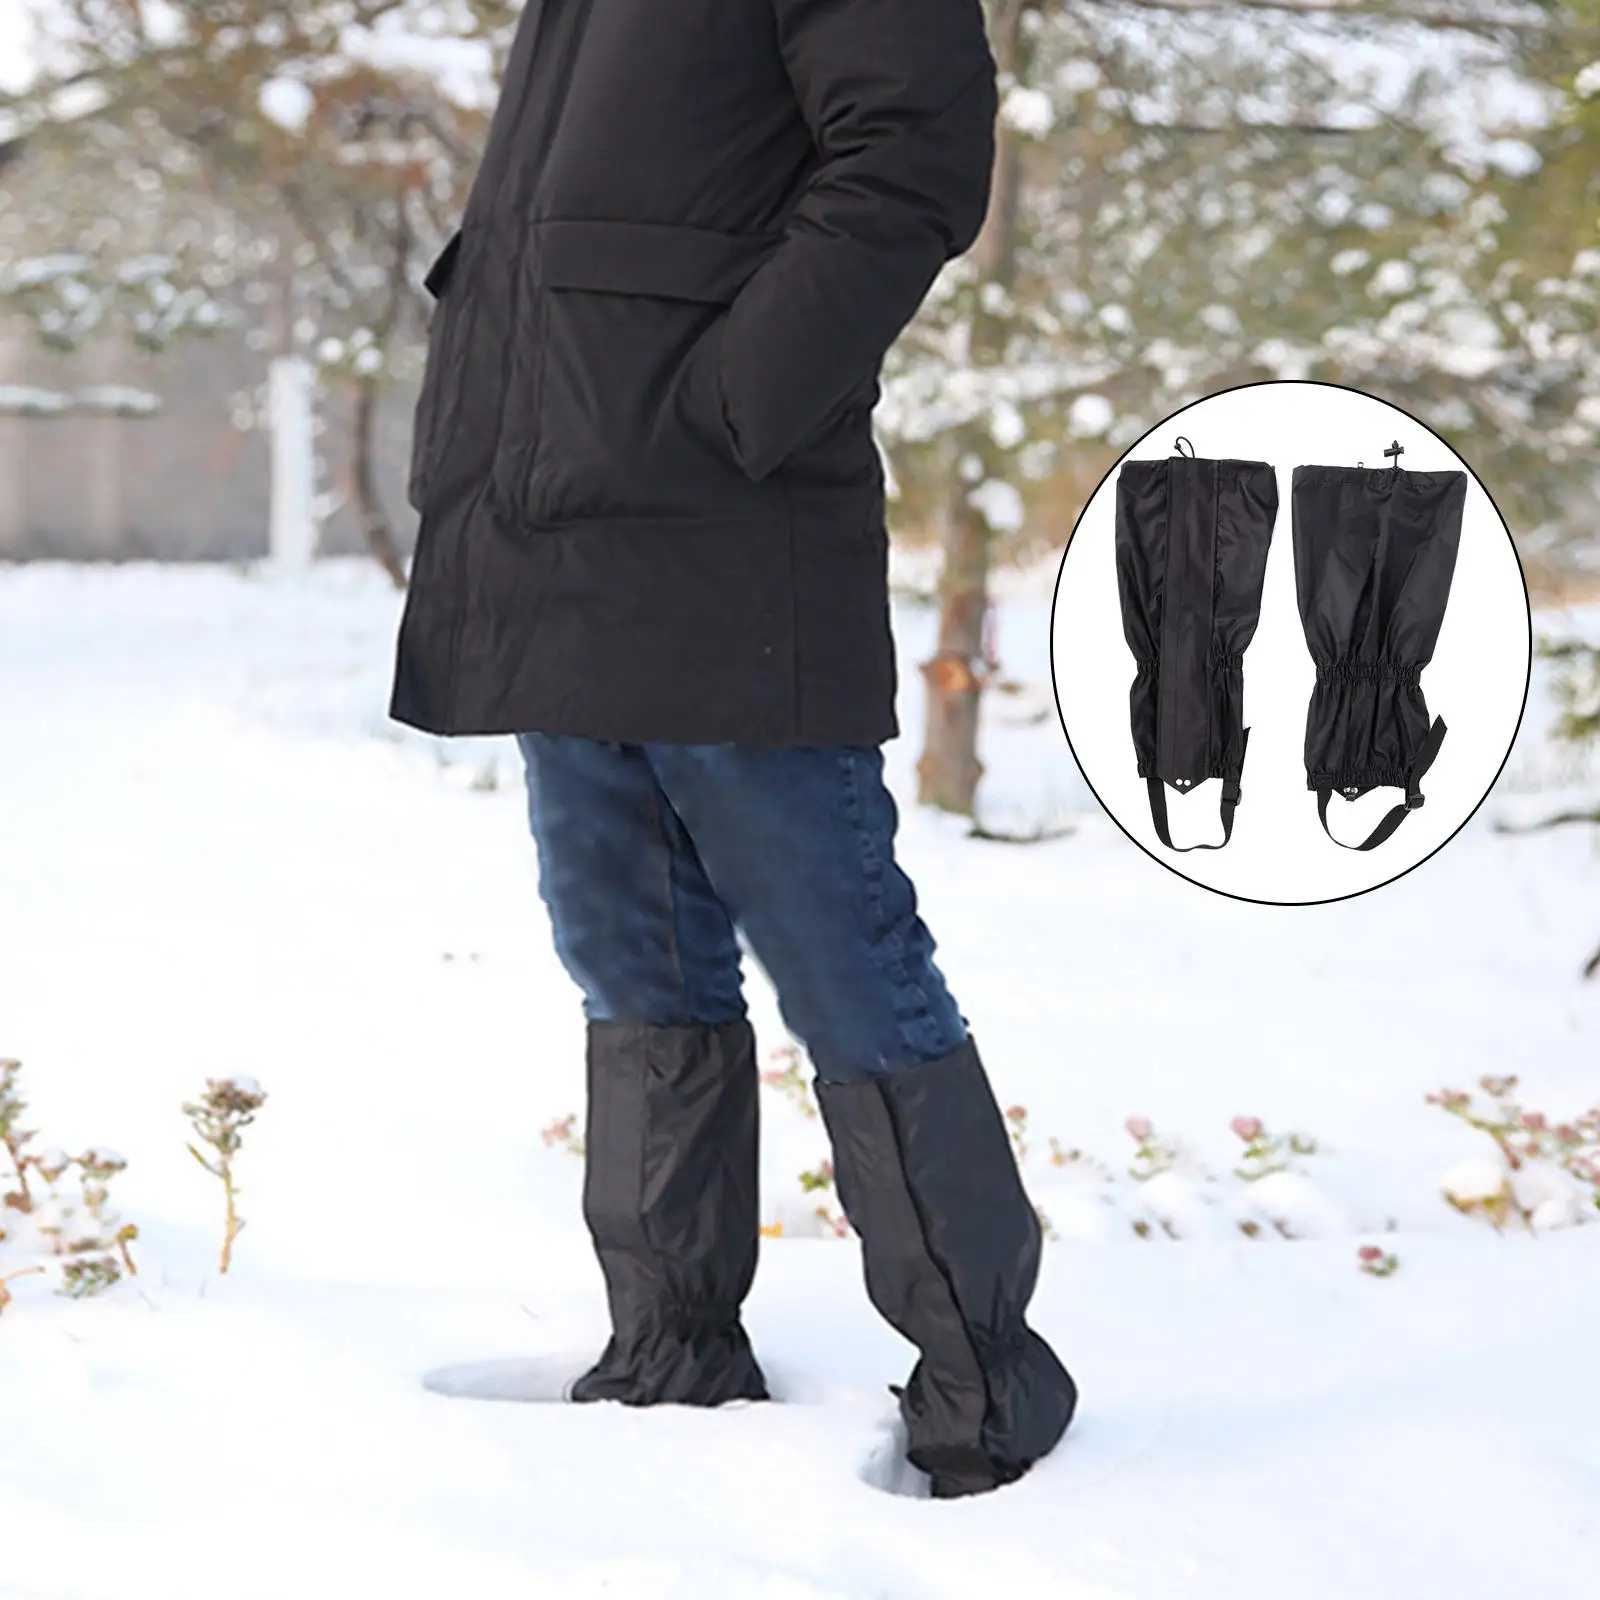 Leg    Shoes Covers Adjustable Legging Guard for Outdoor Walking Unisex